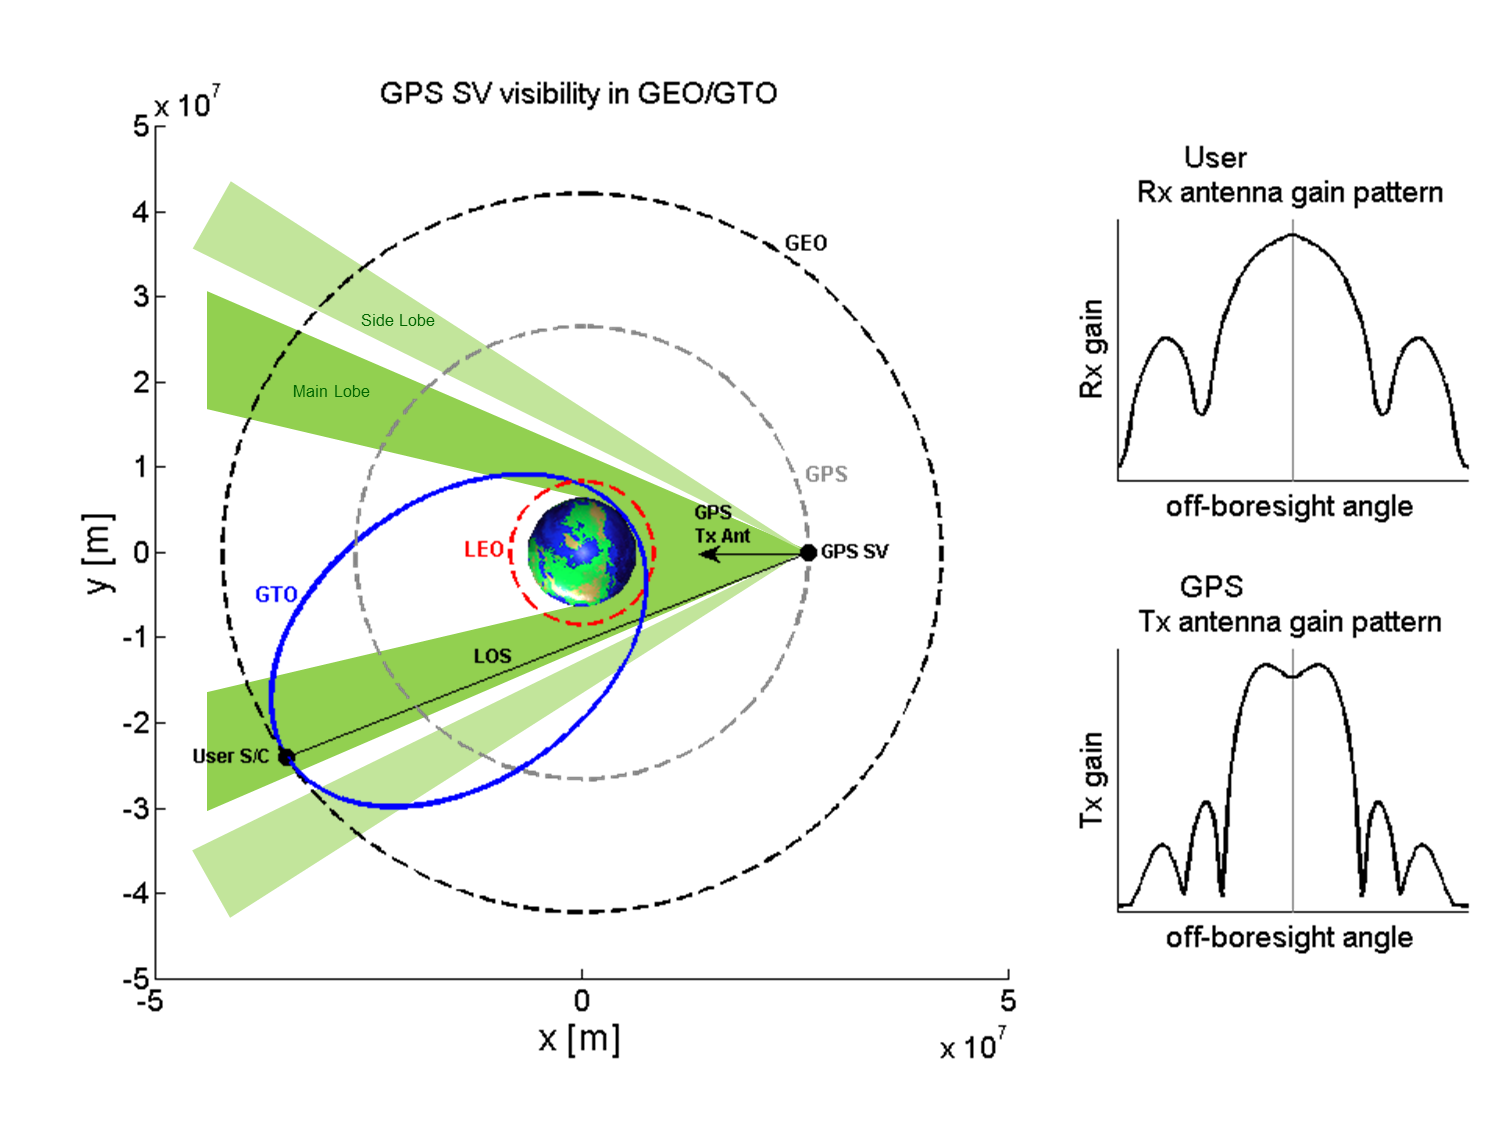 GPS visibility in GEO/GTO. Credit: Airbus DS